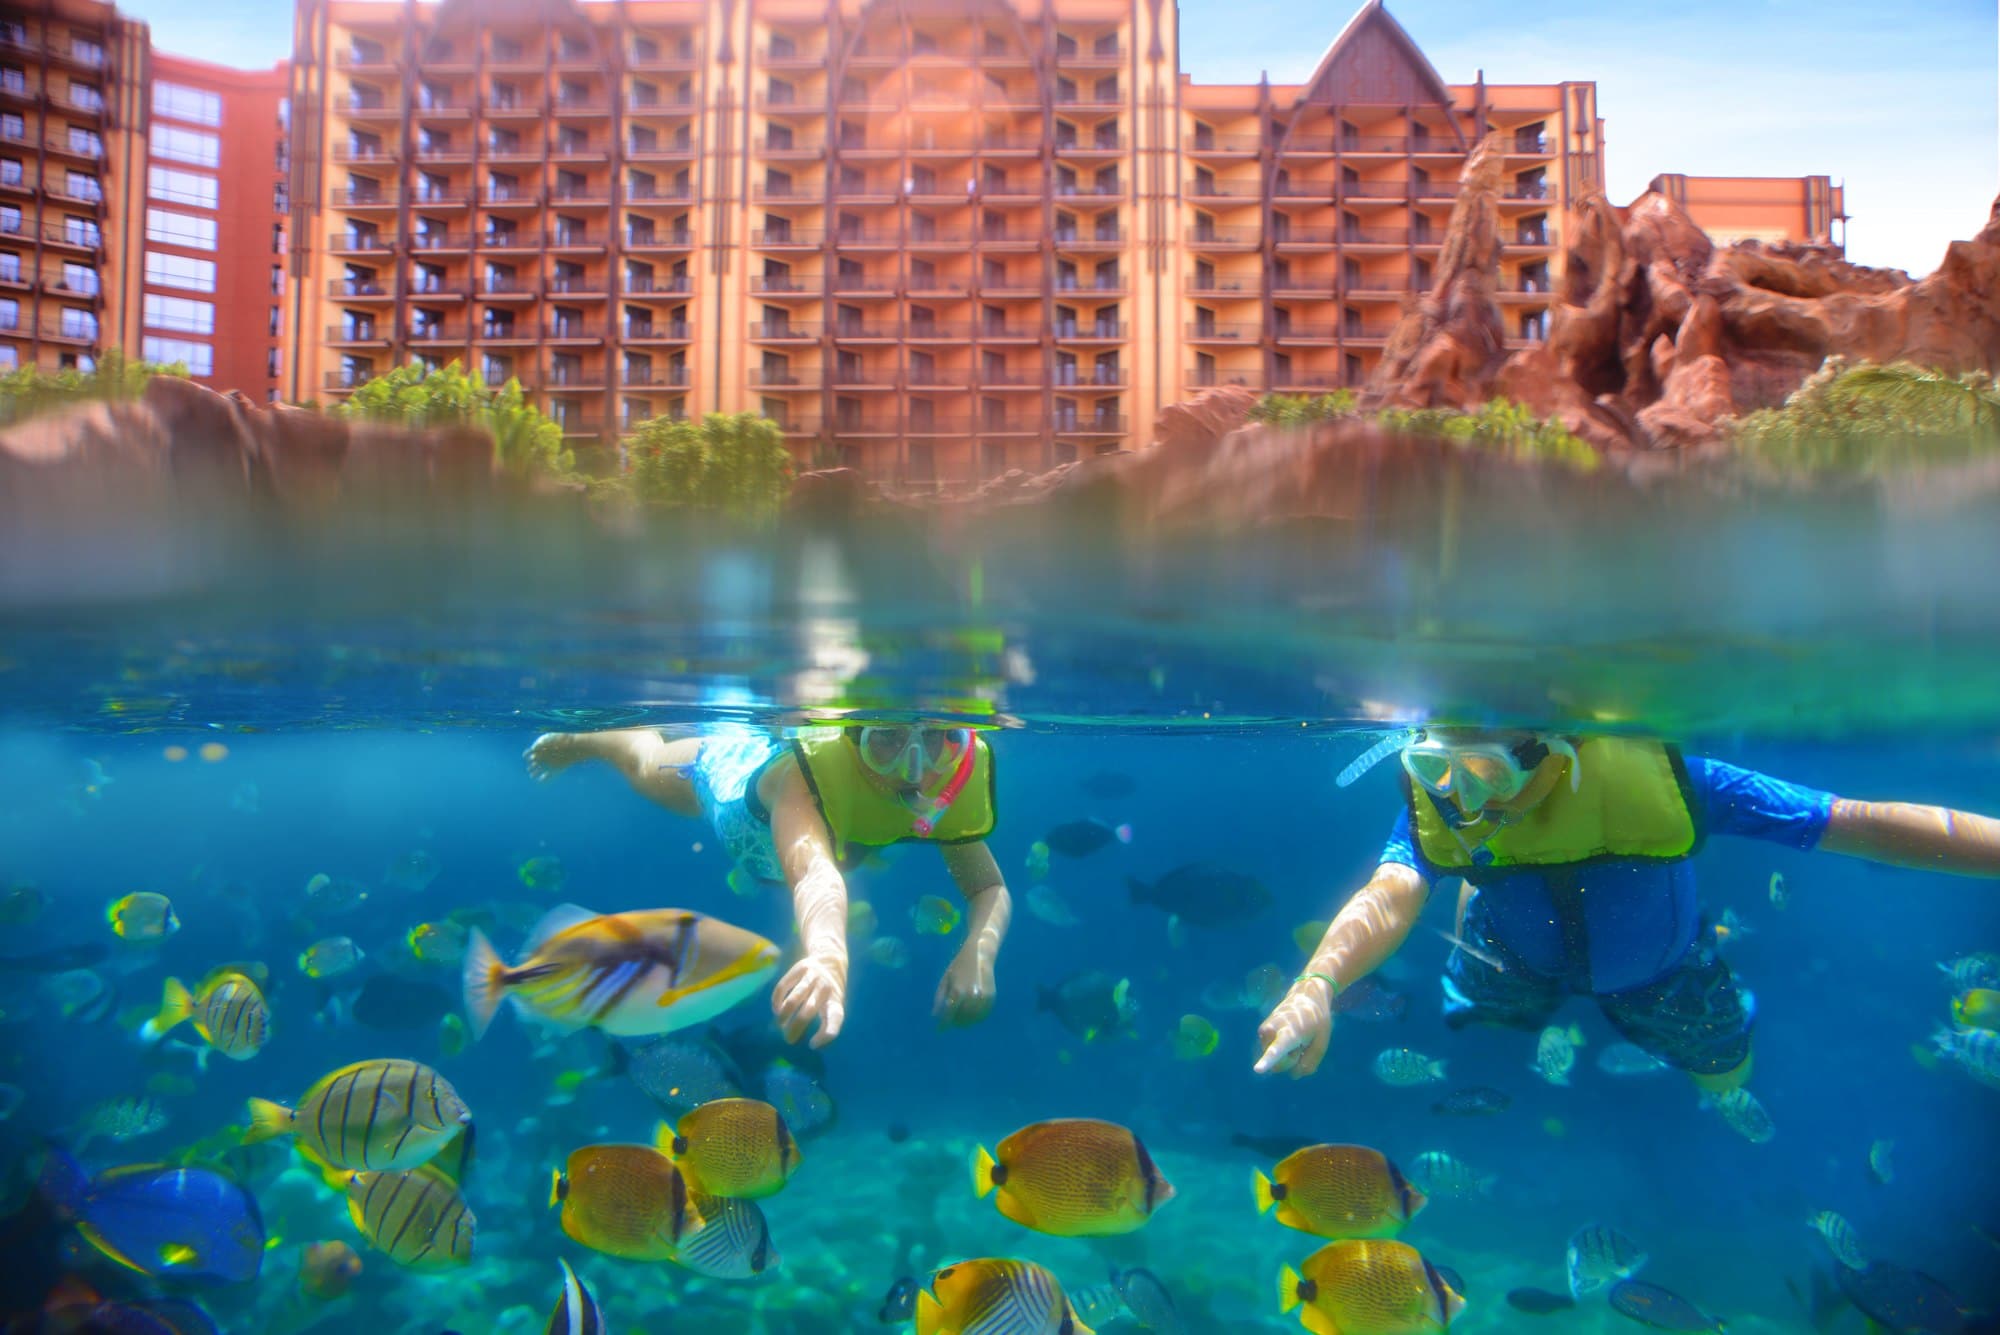 Rainbow Reef is a unique place to try snorkeling with real Hawaiian fish at Disney Aulani